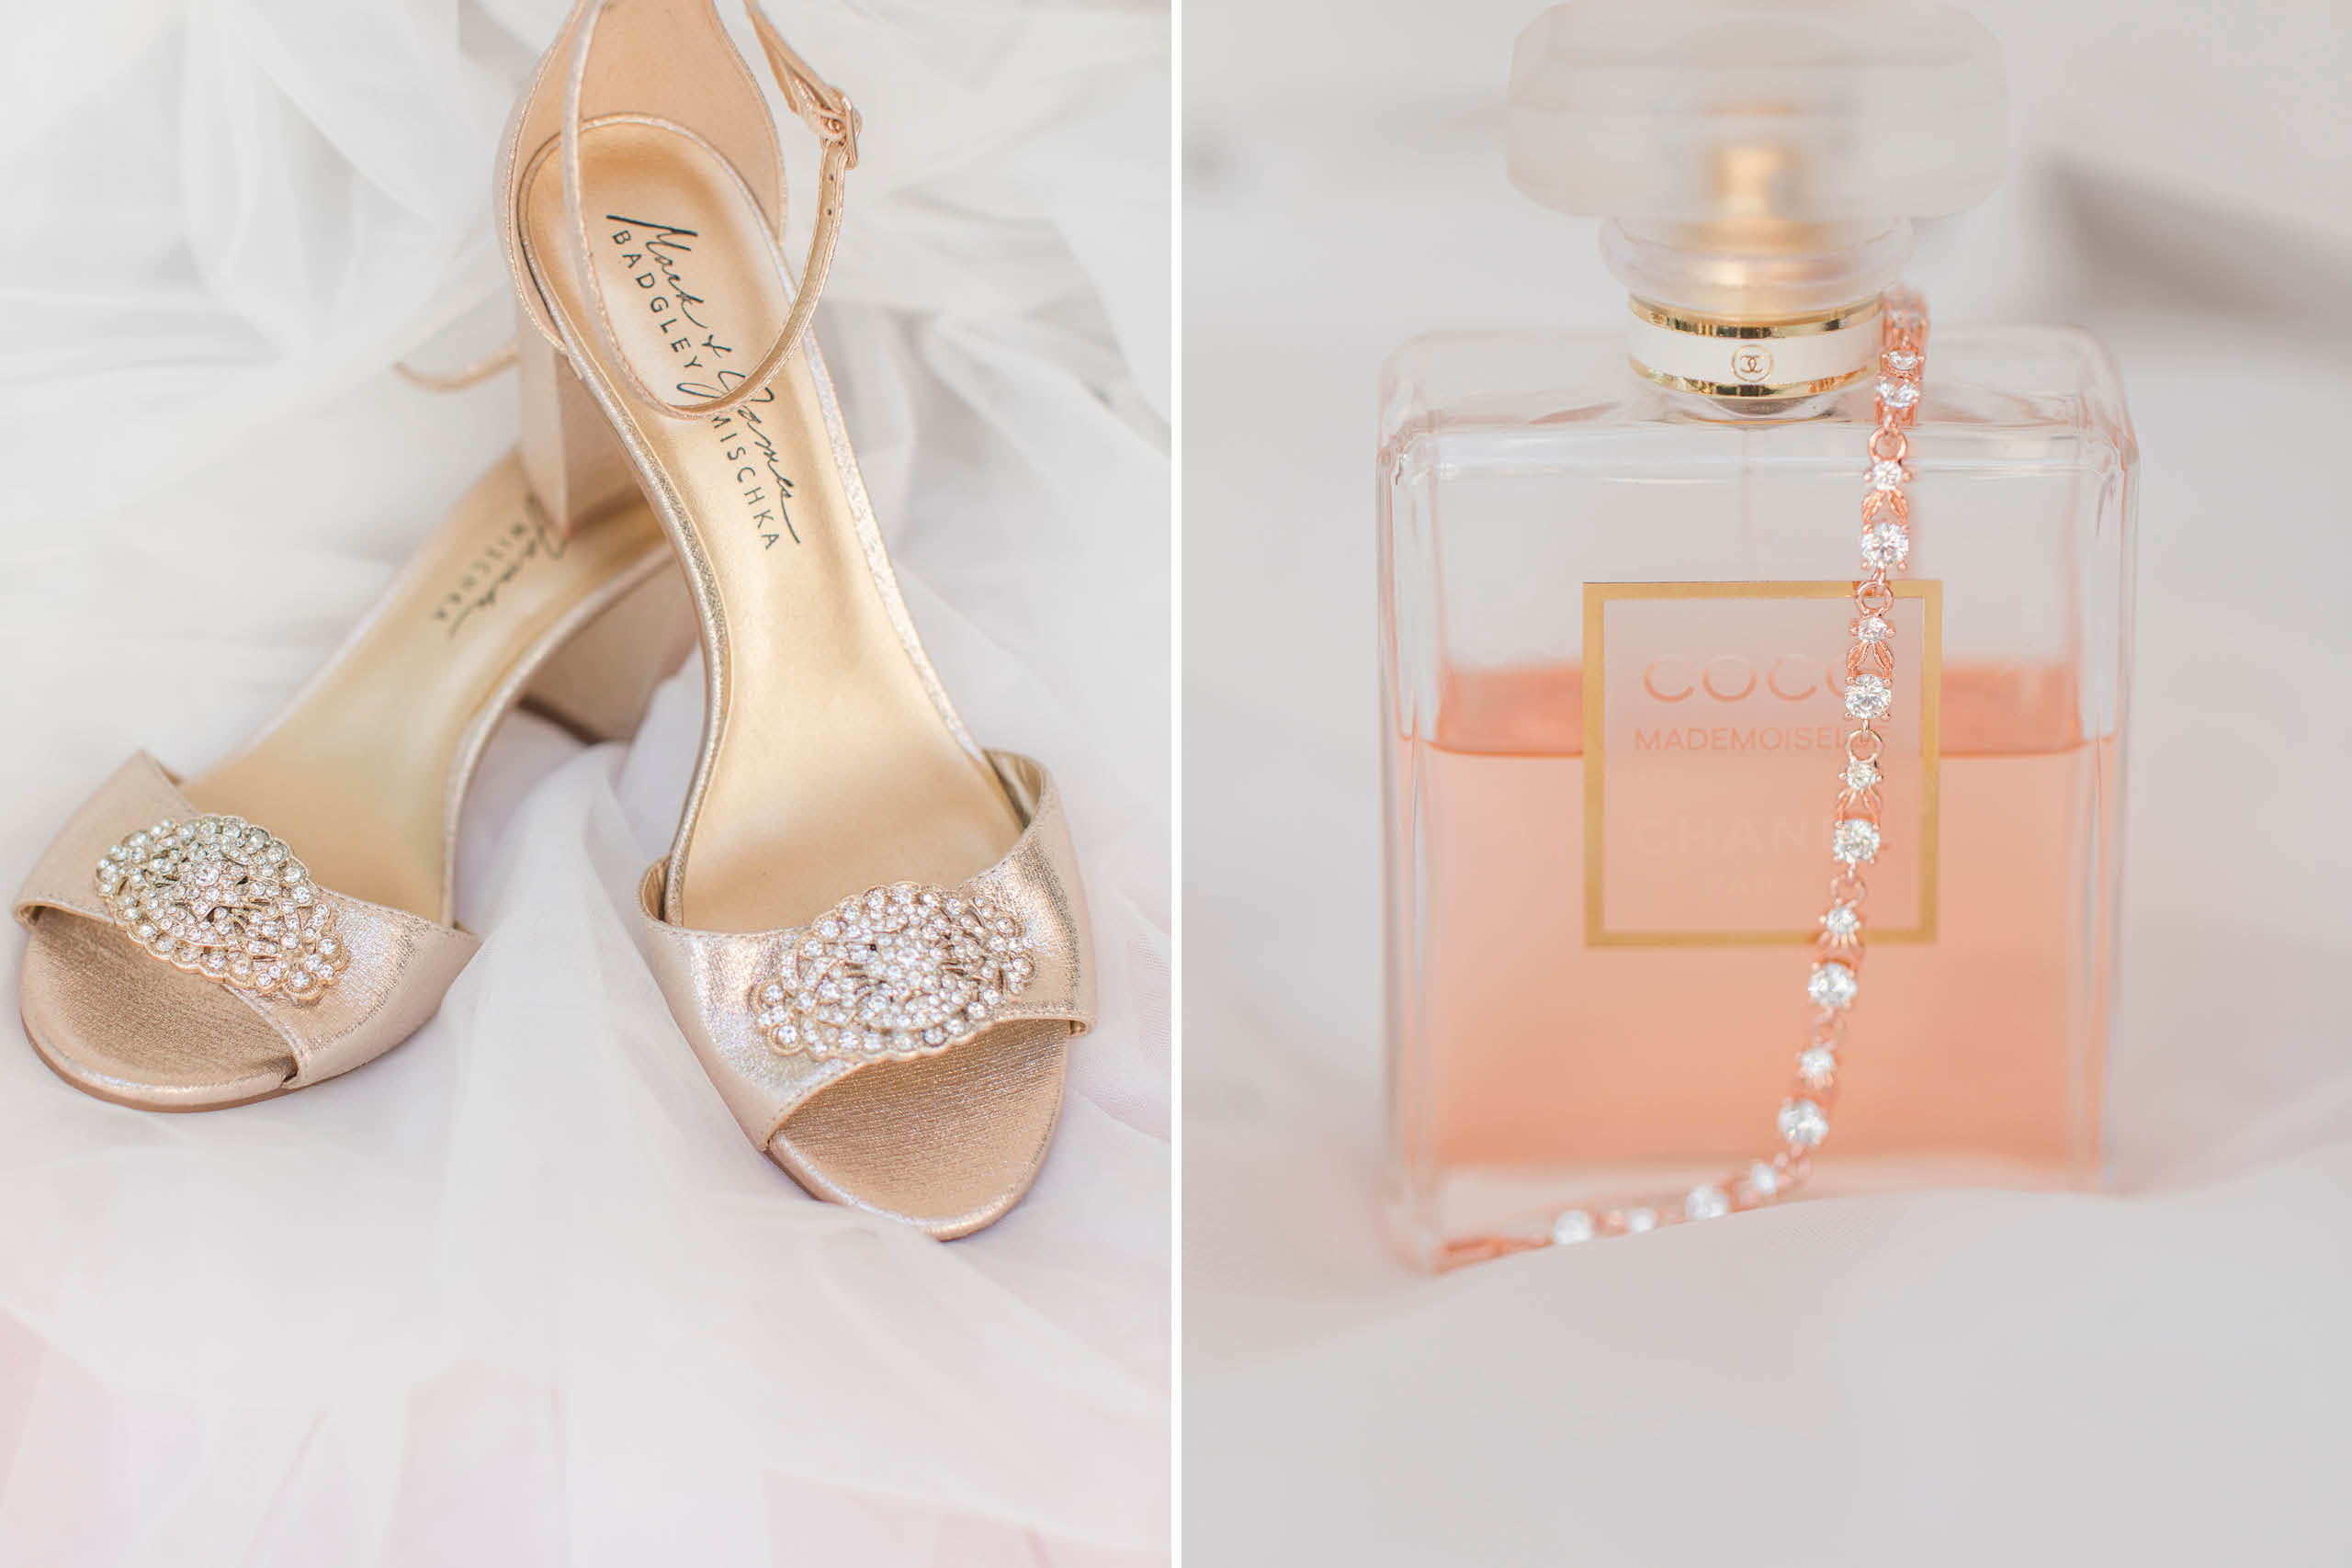 Emerald and pink - St. Anne's Catholic Church Wedding bridal details